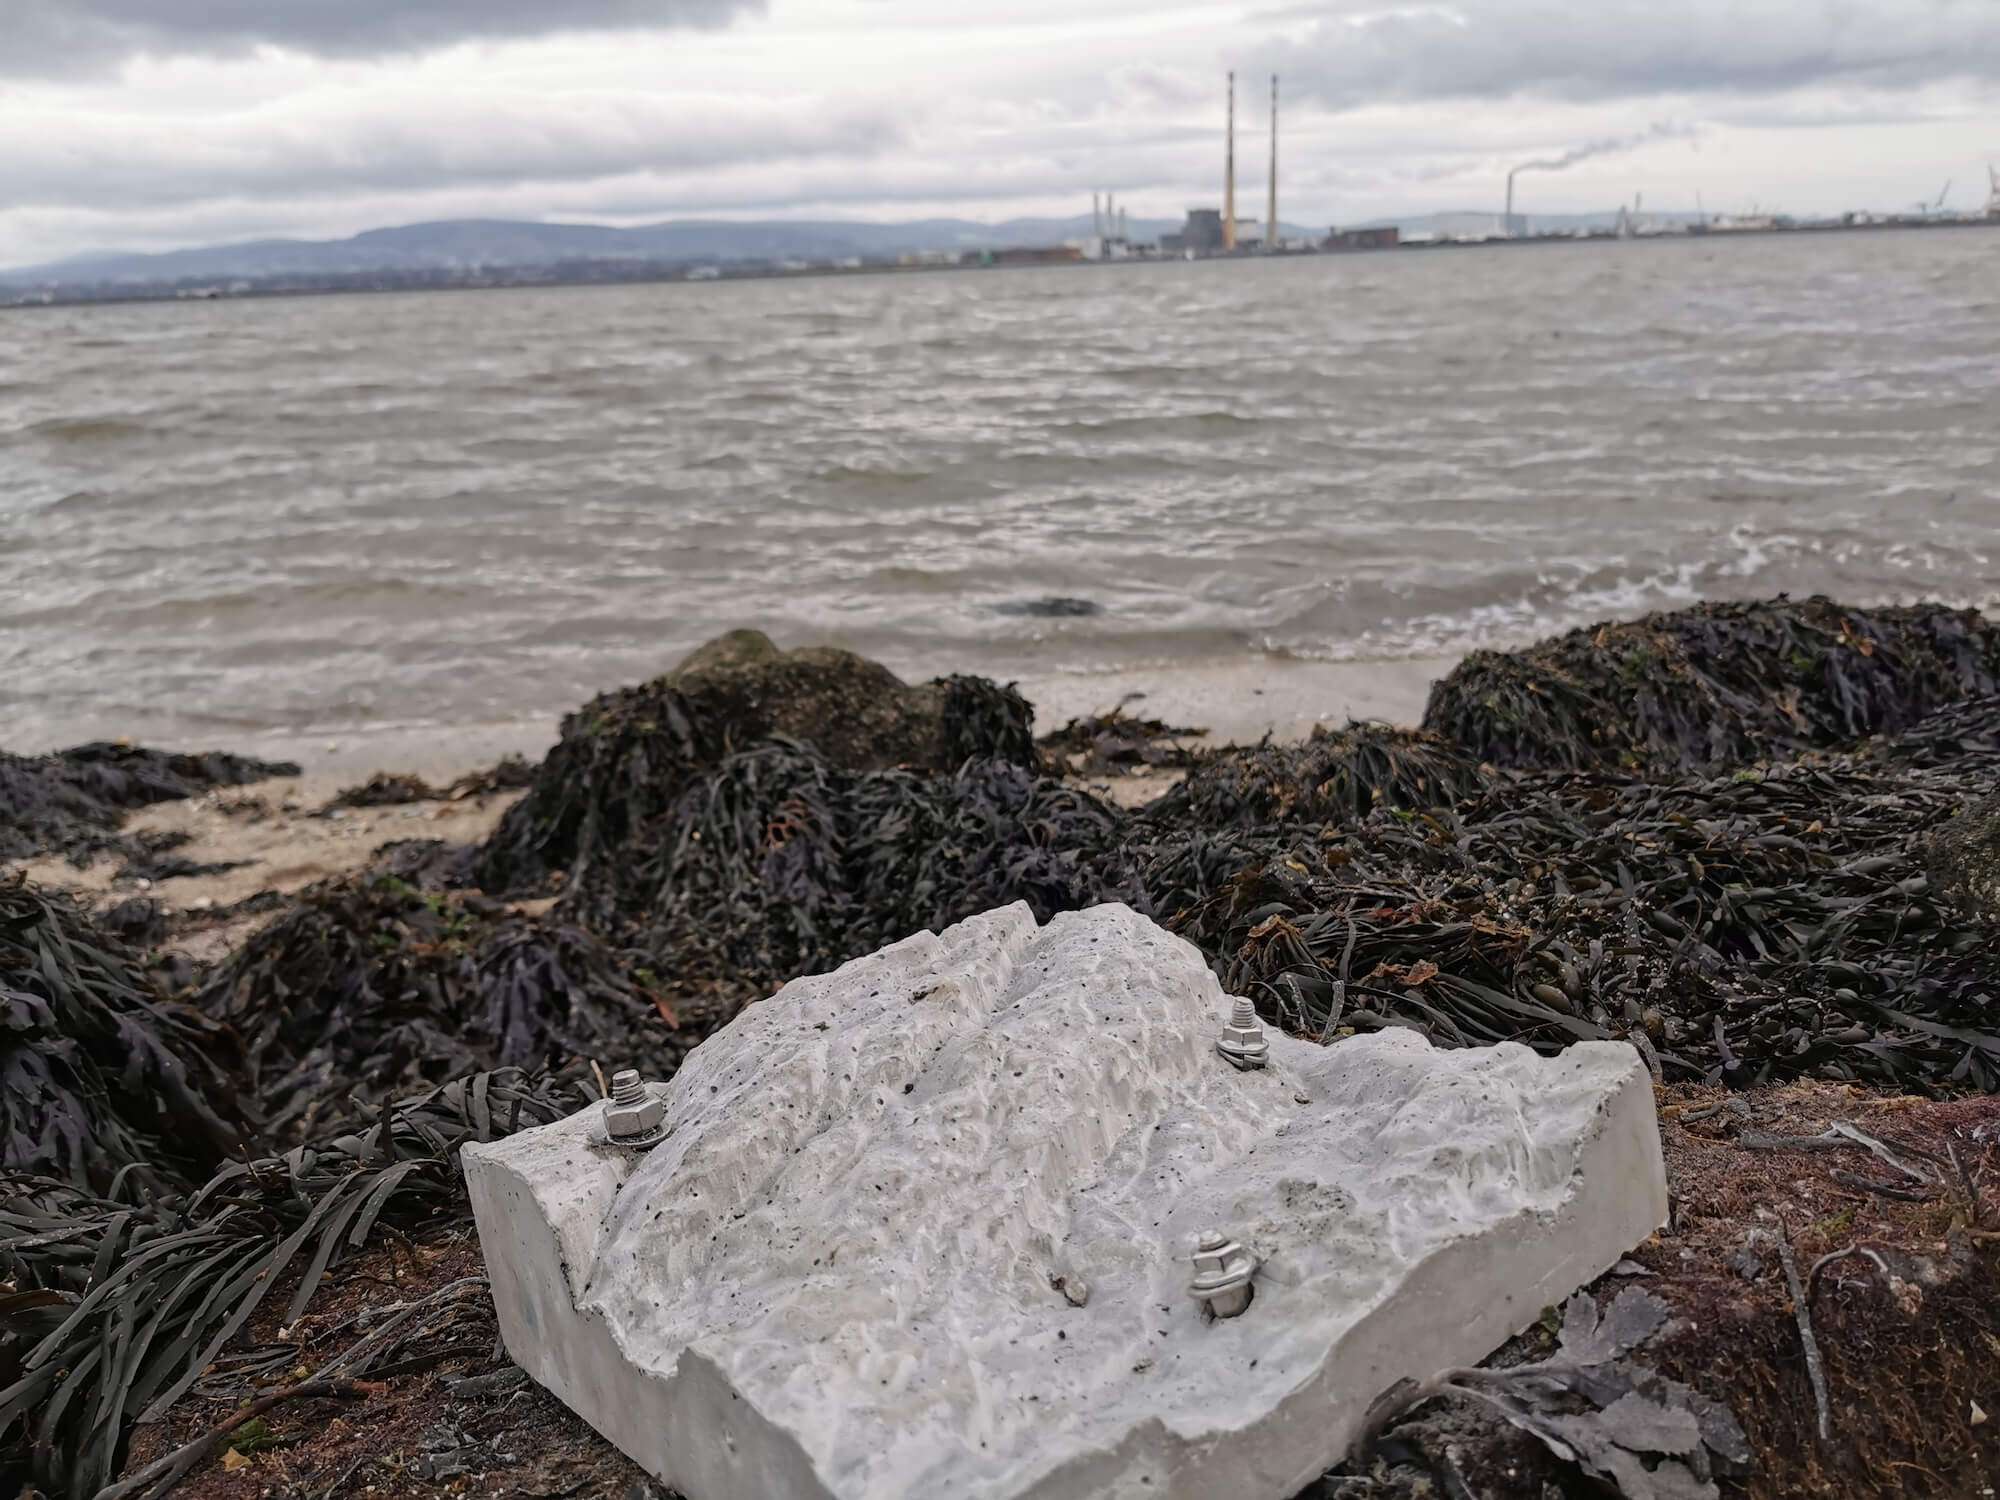 A eco-engineered tile designed by Ecostructure researchers is deployed on the Dublin coast for experiments.